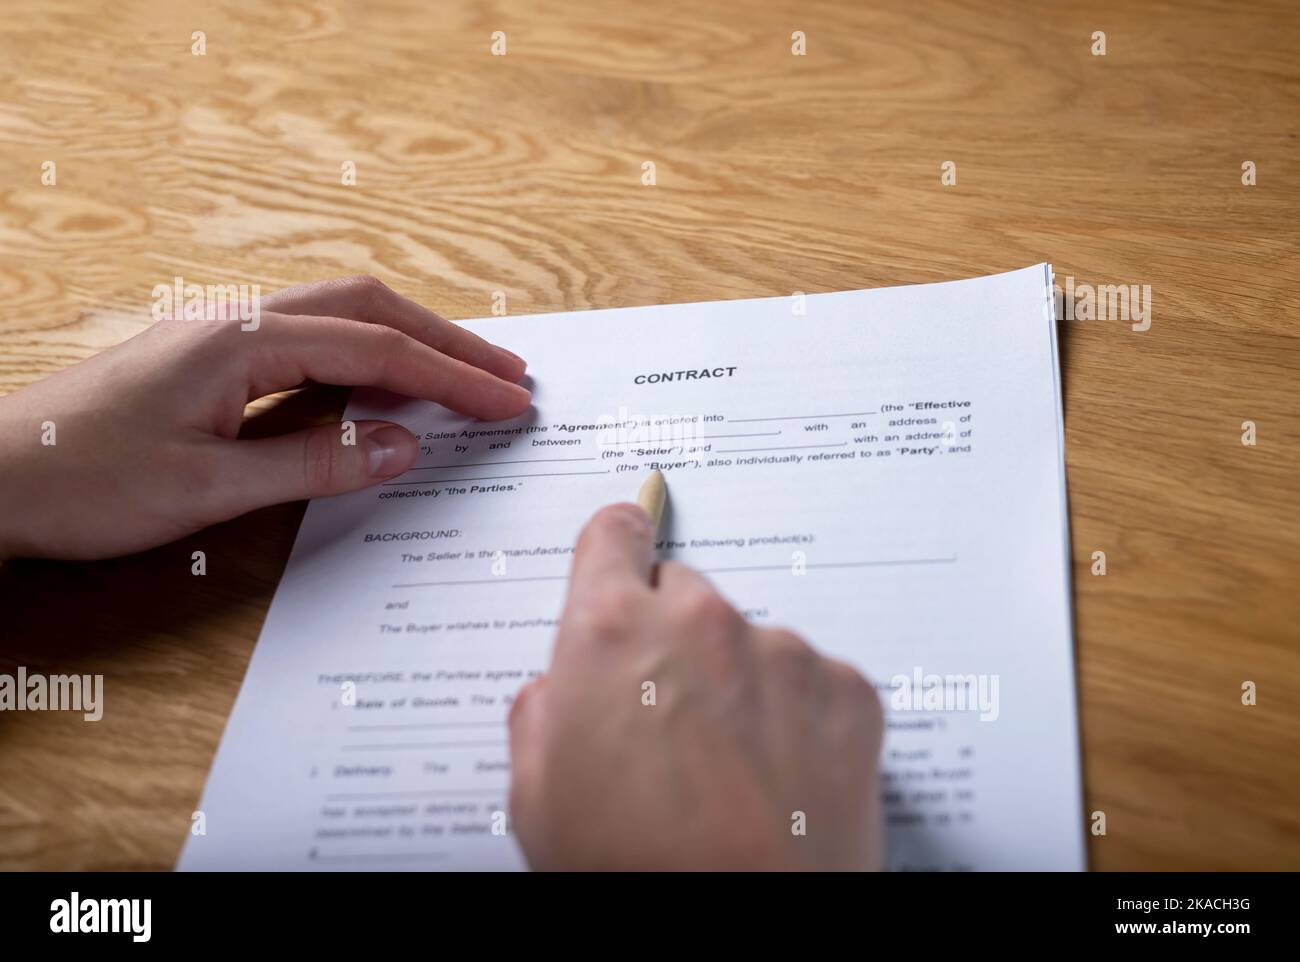 Paper sales contract on office desk in hands with pen, pov. Stock Photo